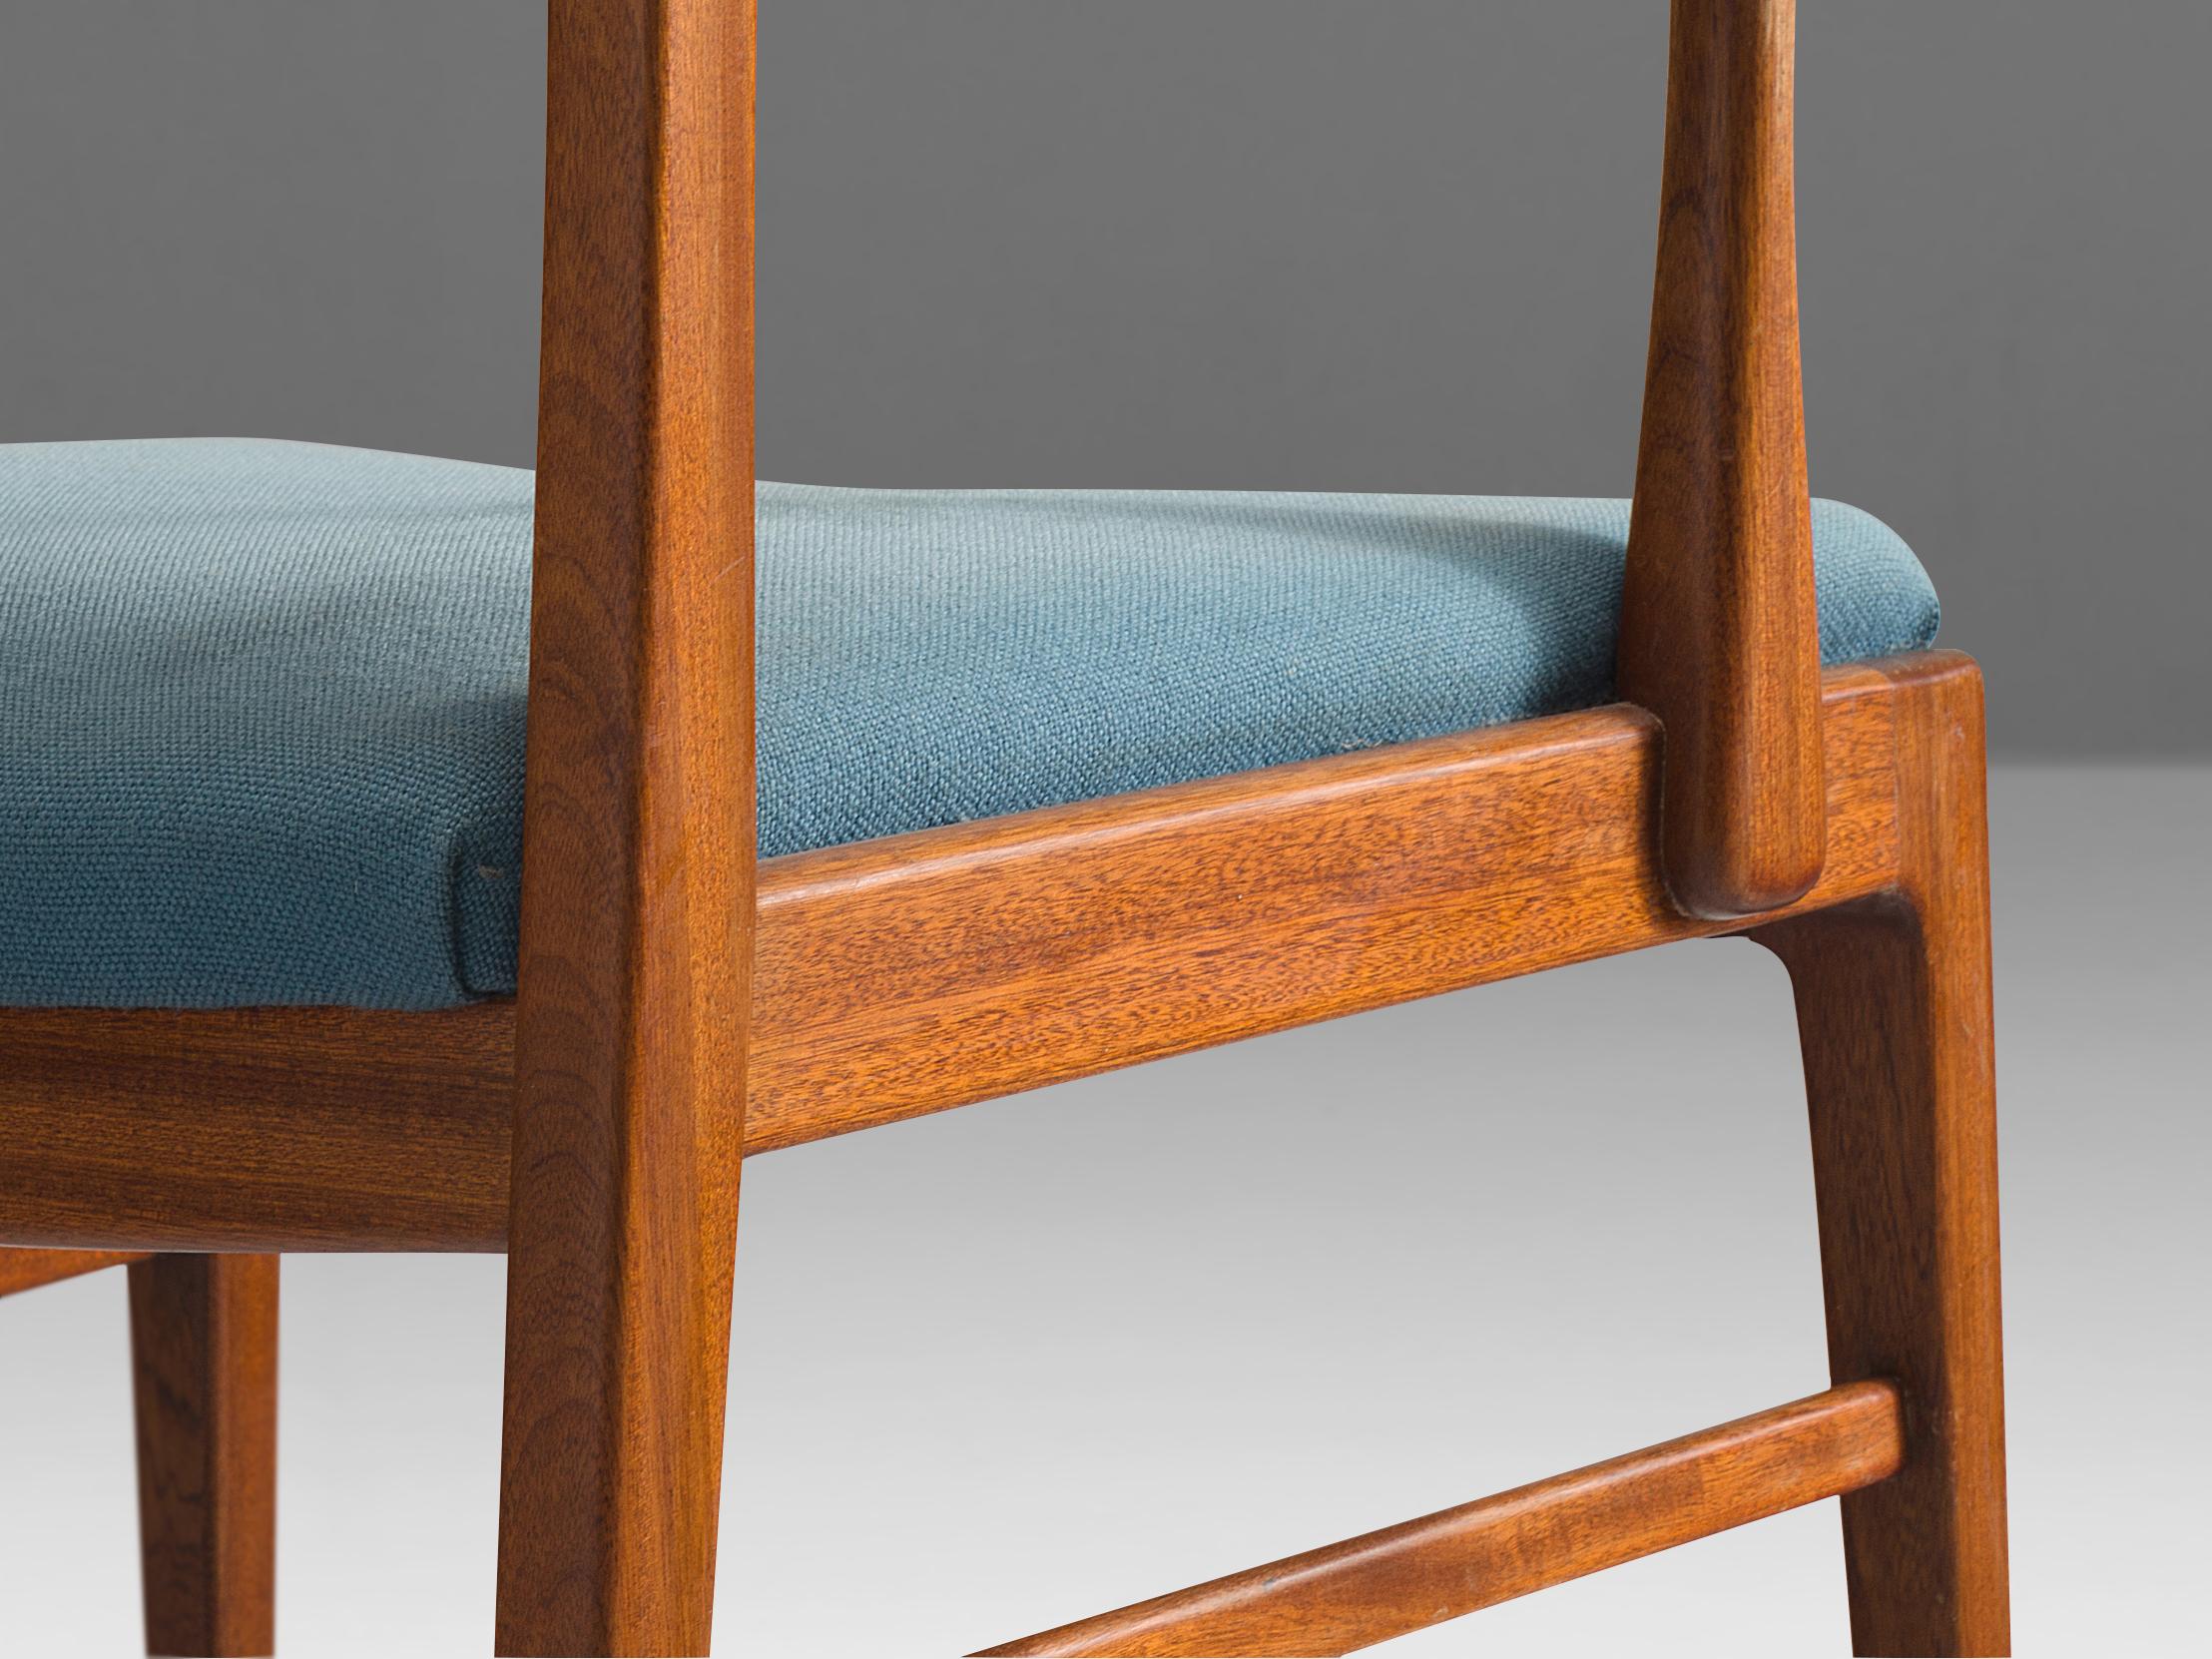 Set of eight armchairs, mahogany, upholstery, Denmark, 1960s

Set of eight sculpted dining chairs in solid oak and blue upholstery. These chairs show the characteristics of the well-crafted furniture. Wood joints are shown at the armrests and